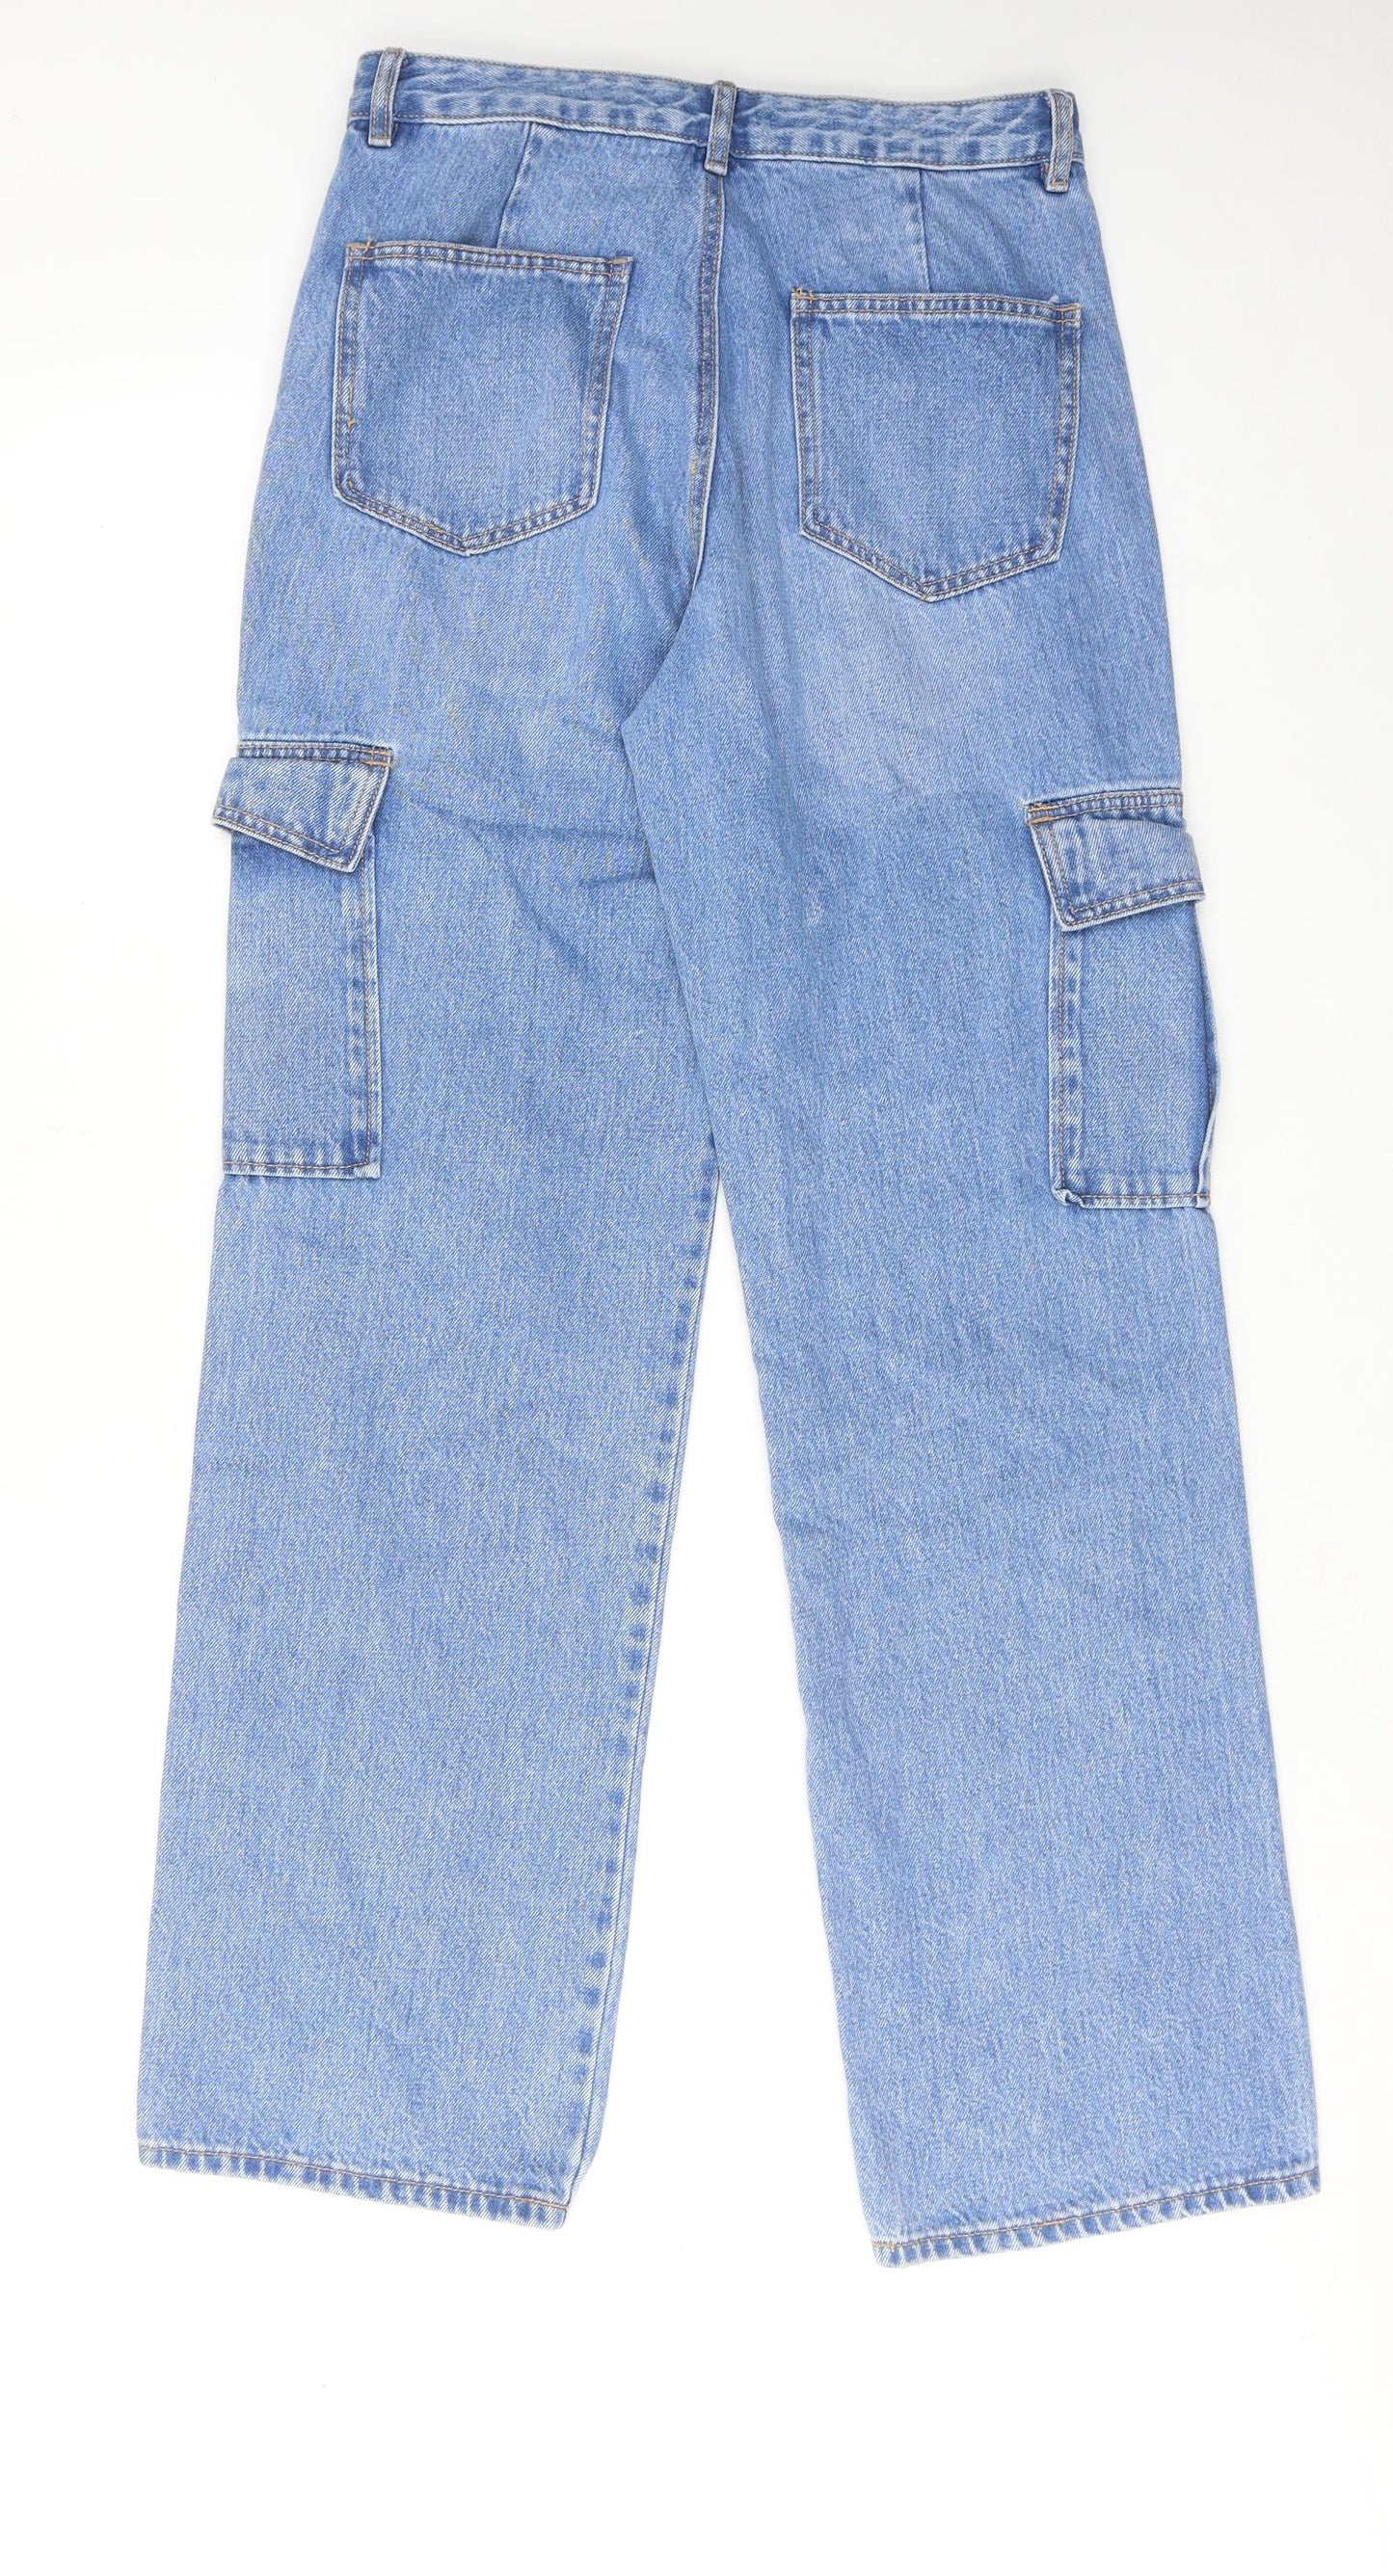 Stradivarius Womens Blue Cotton Straight Jeans Size 12 Relaxed Zip